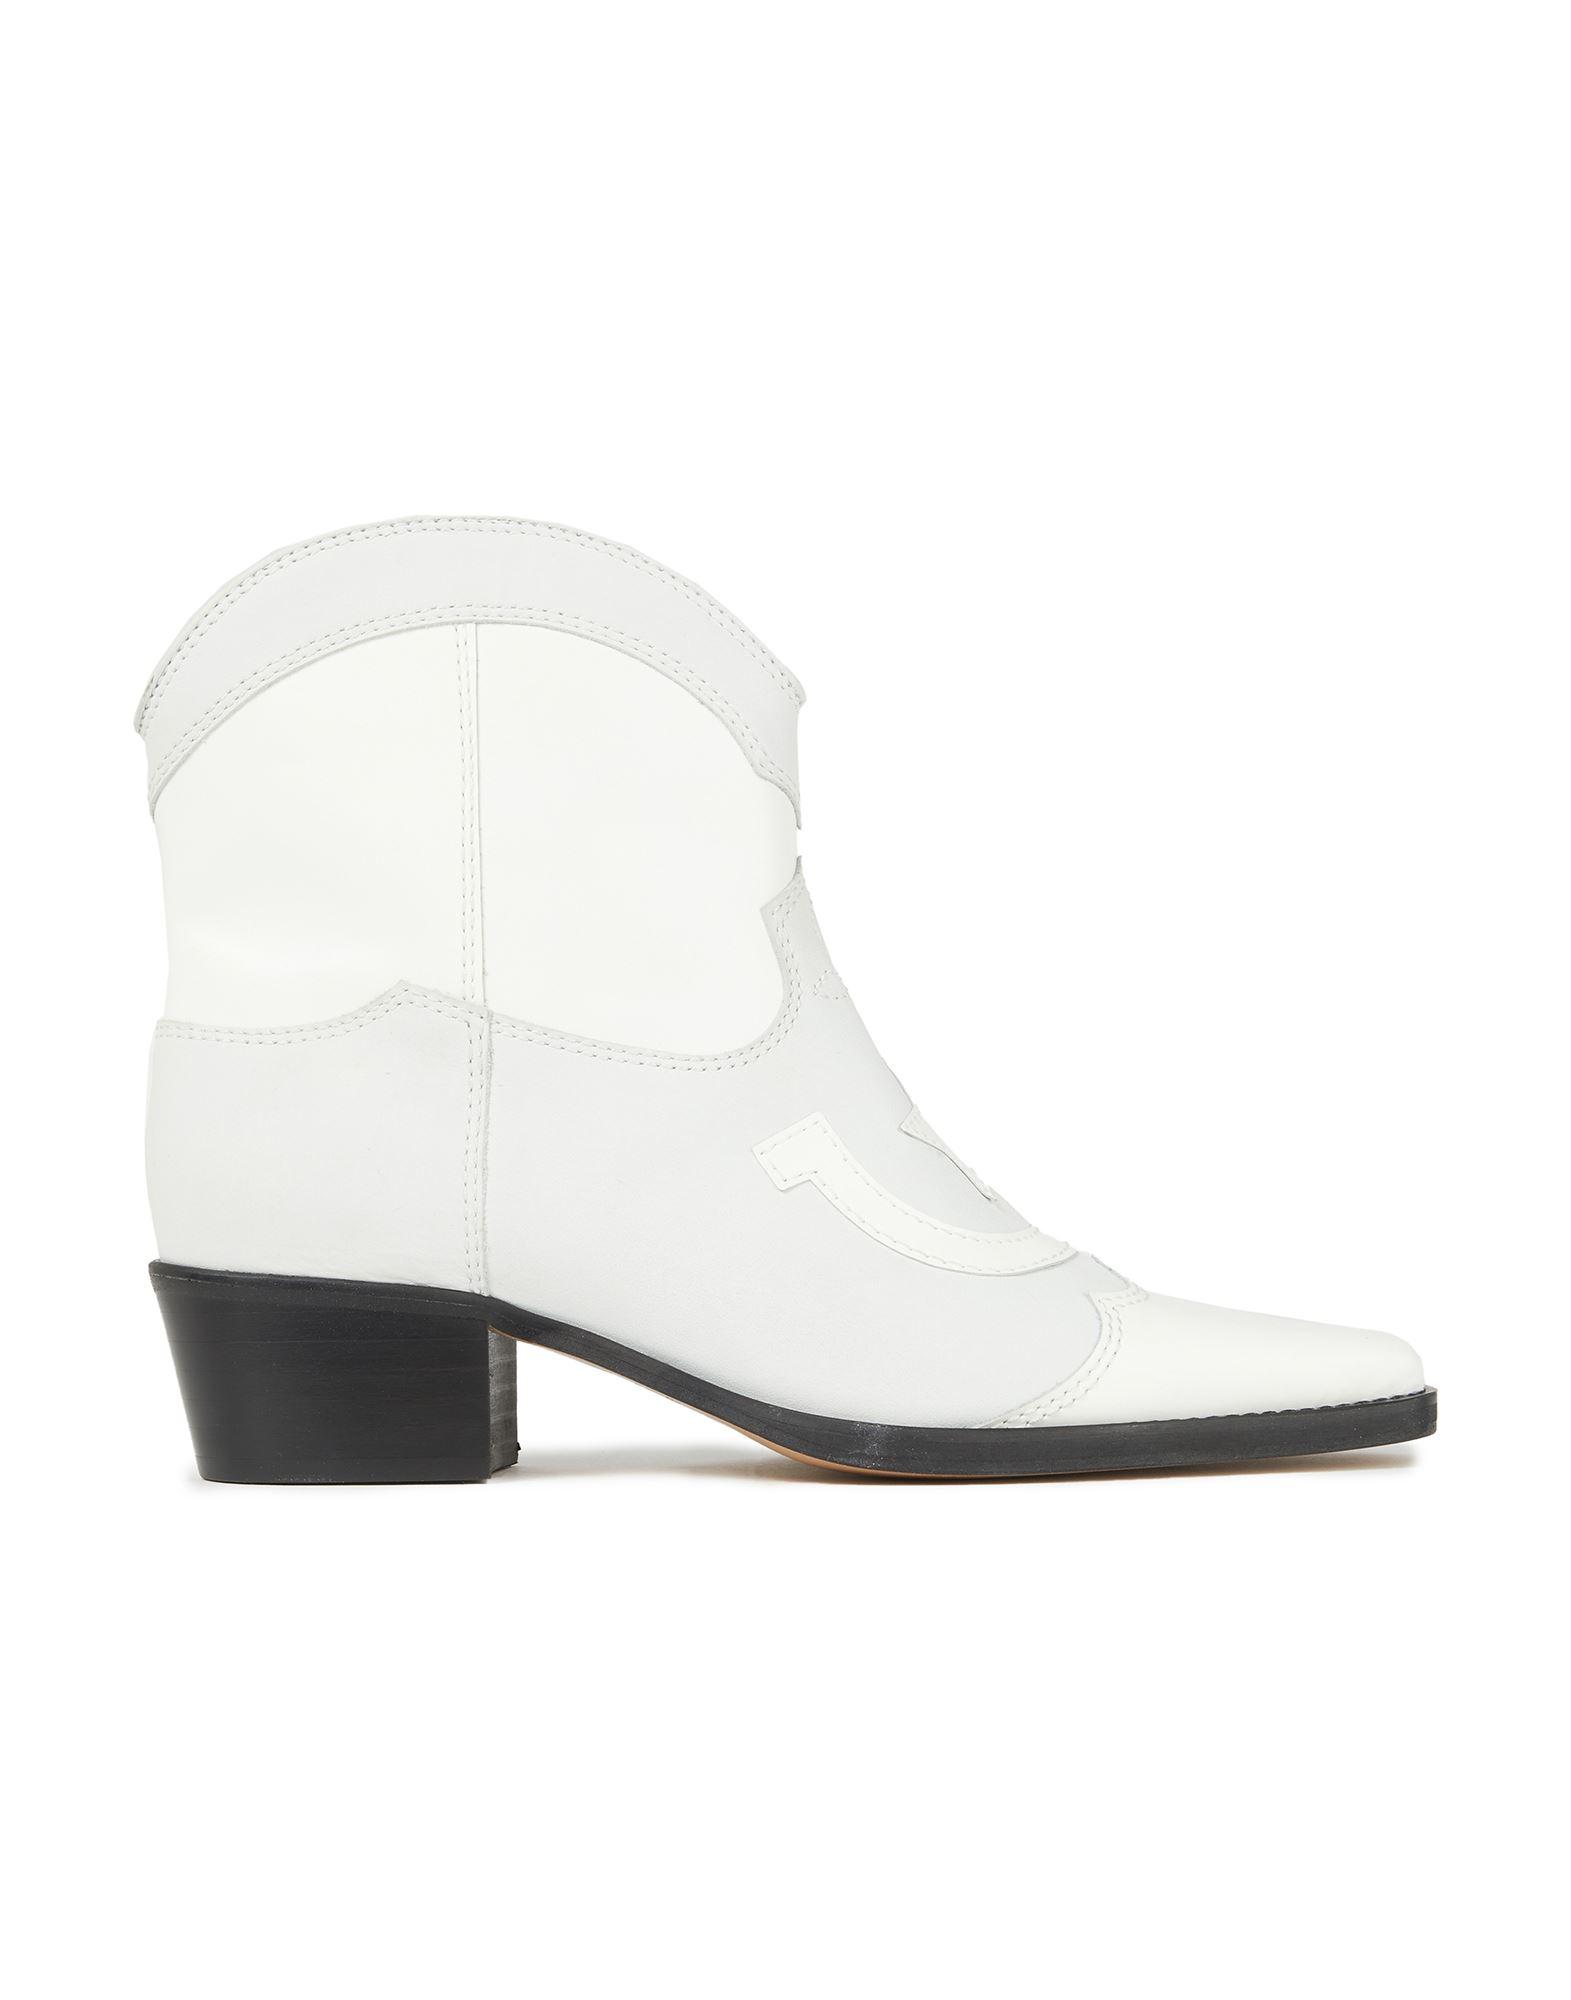 Ganni Ankle Boots in White | Lyst